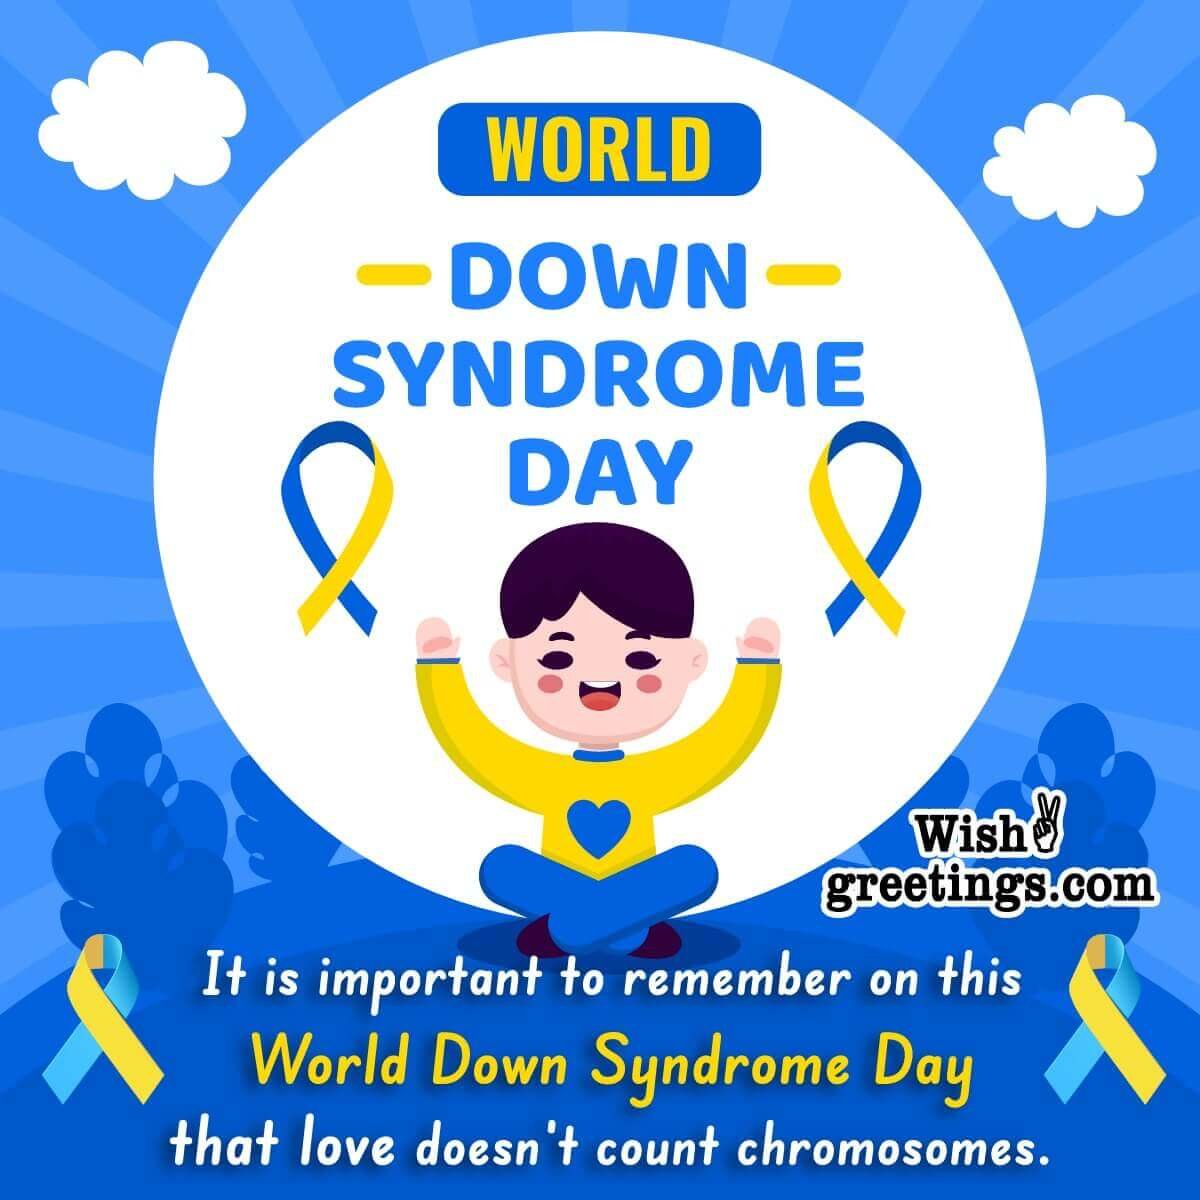 World Down Syndrome Day Message Photo